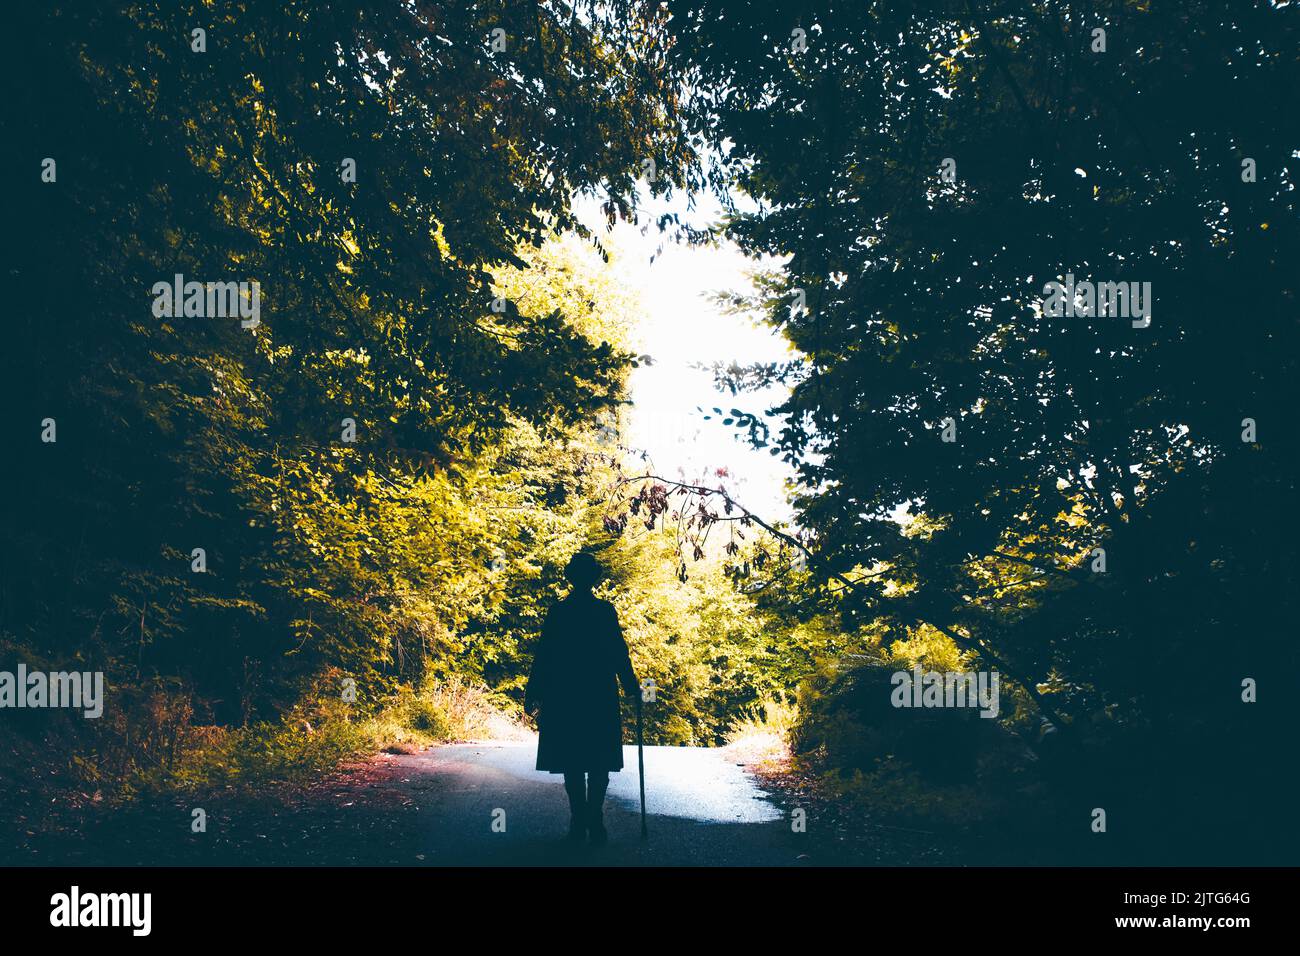 Mysterious man with hat and a walking stick walking through a fairytale forest Stock Photo